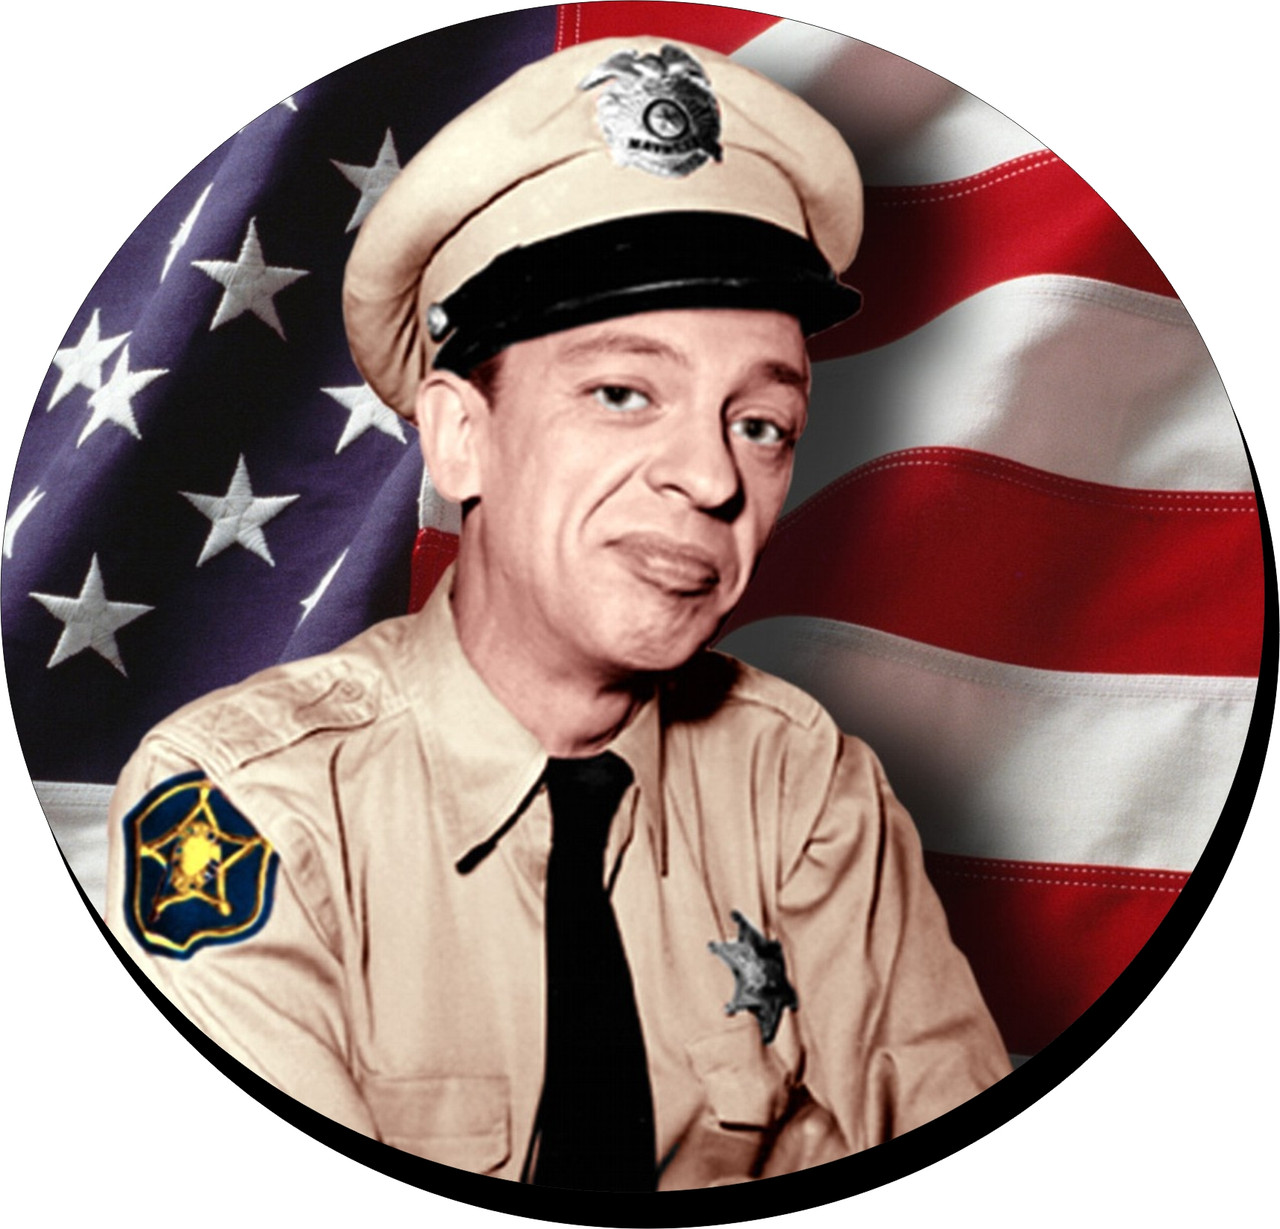 Set of 4 Coaters Coasters Barney Fife Andy Griffith Show